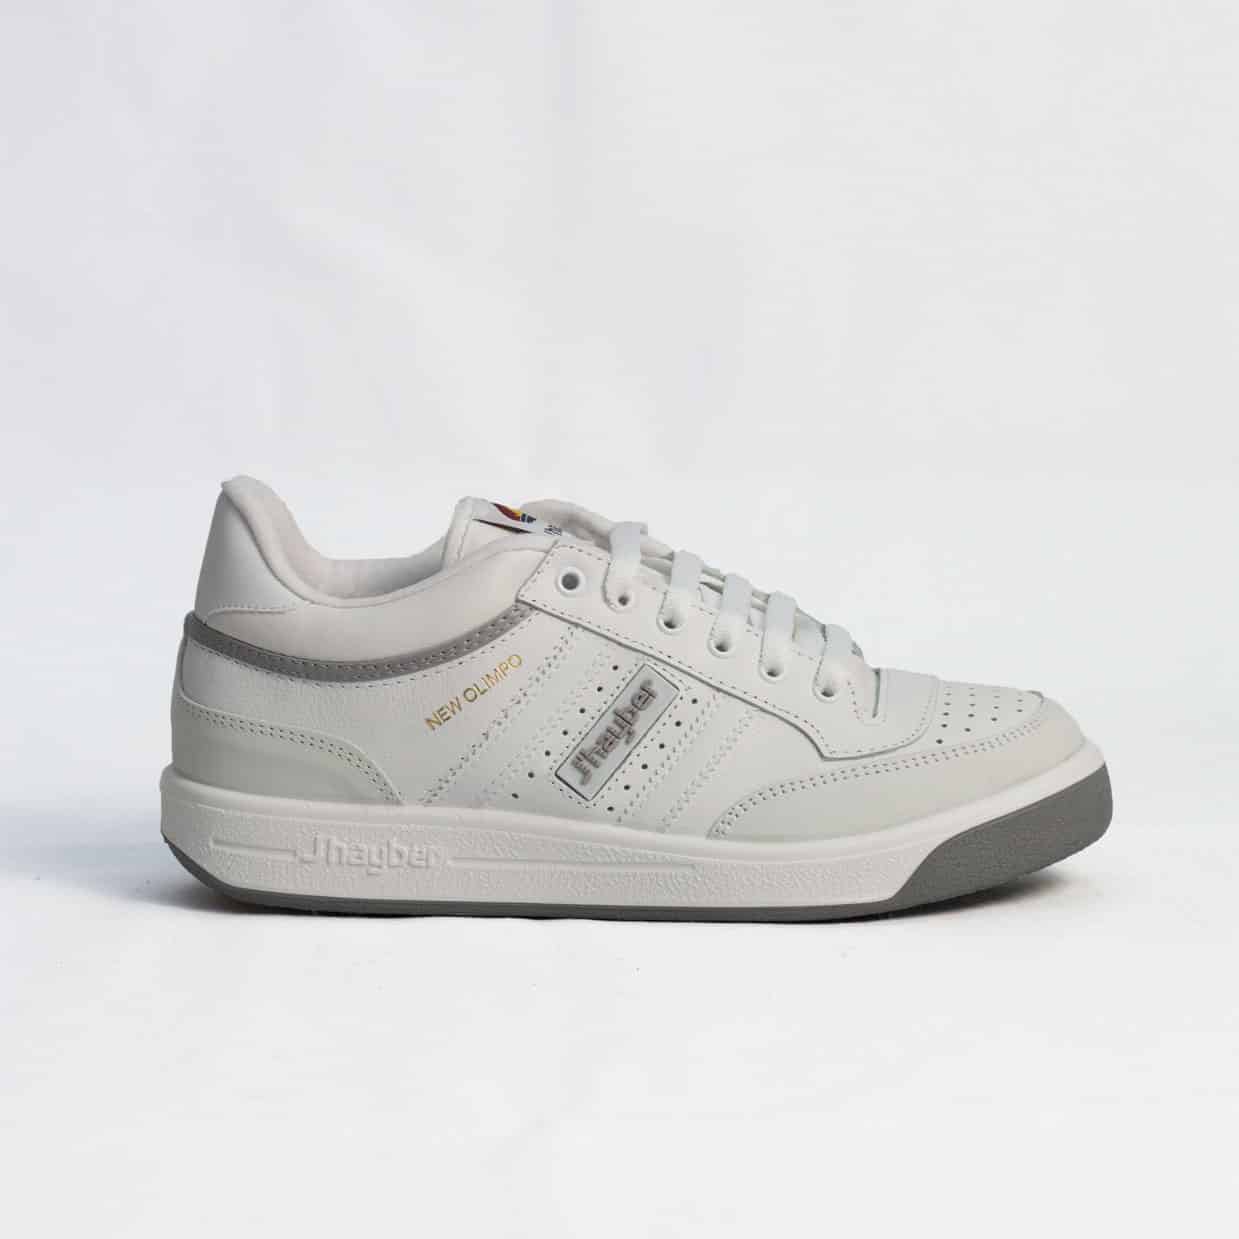 JHAYBER NEW OLIMPO BLANCO-GRIS DEPORTIVA PARA HOMBRE